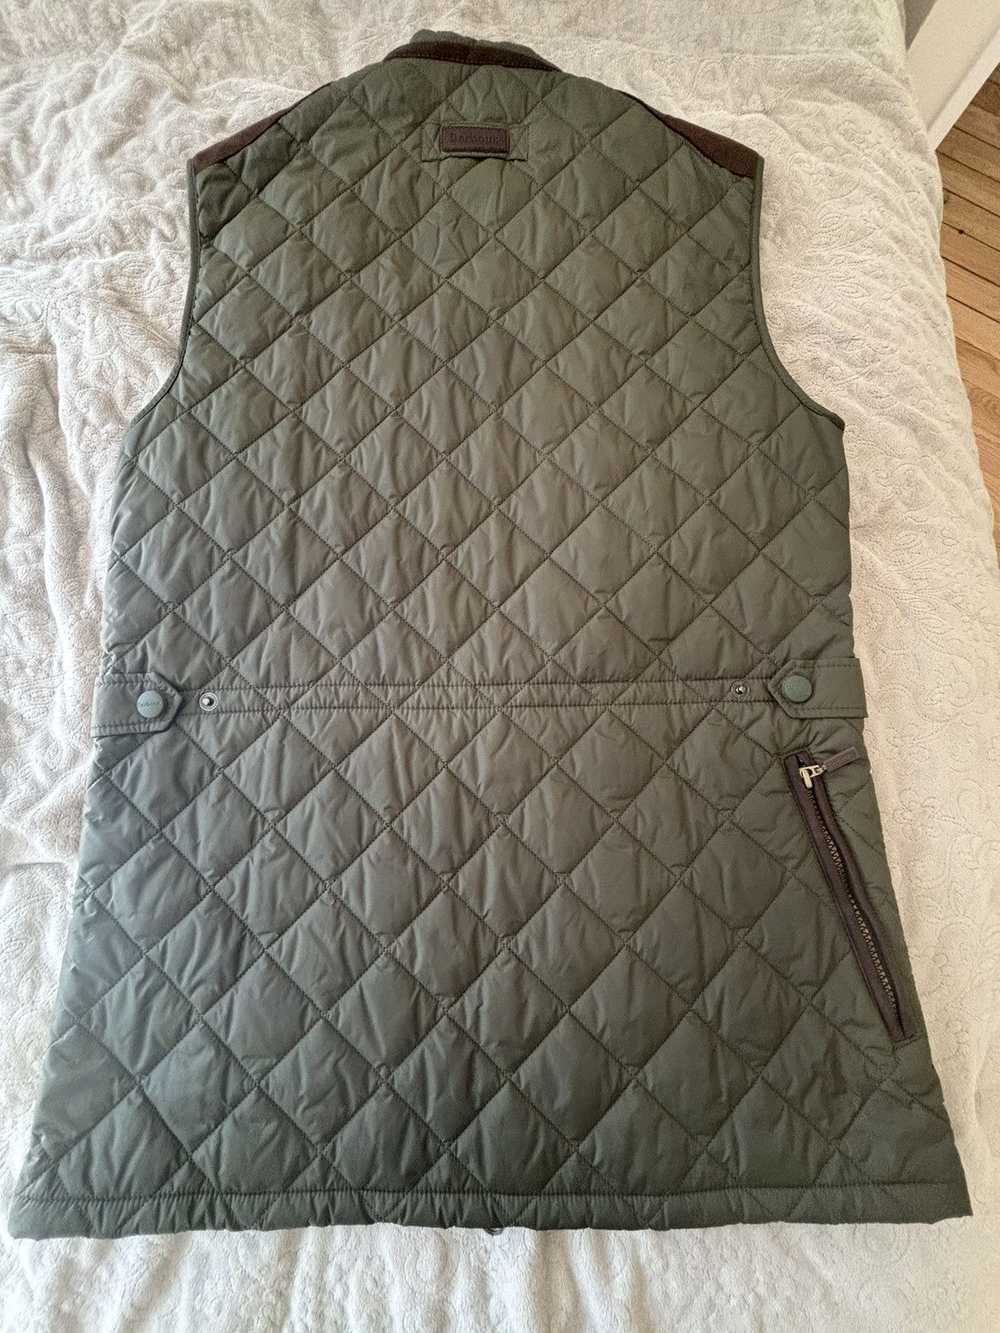 Barbour Barbour Quilted Gilet - Size Small - image 2